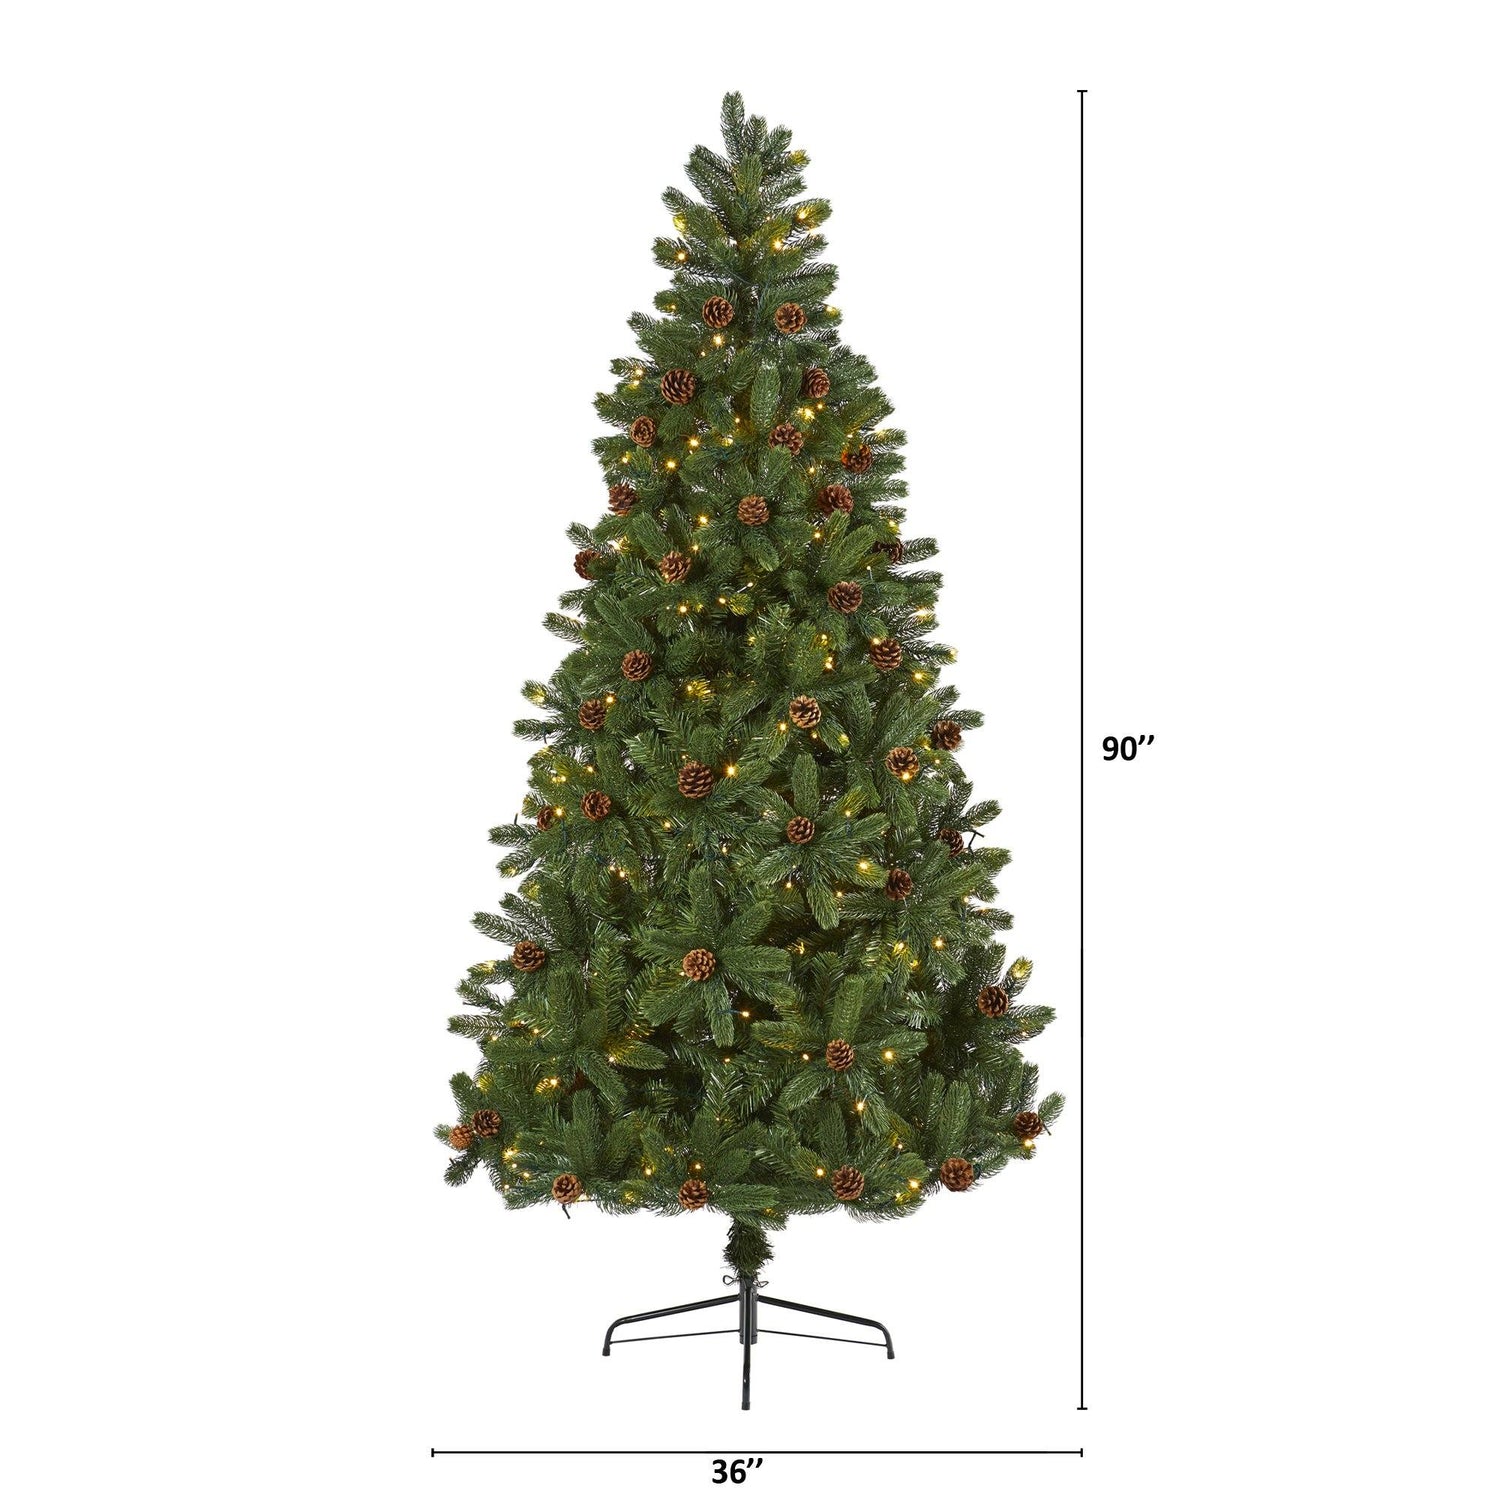 7.5' Rocky Mountain Spruce Artificial Christmas Tree with Pinecones and 400 Clear LED Lights